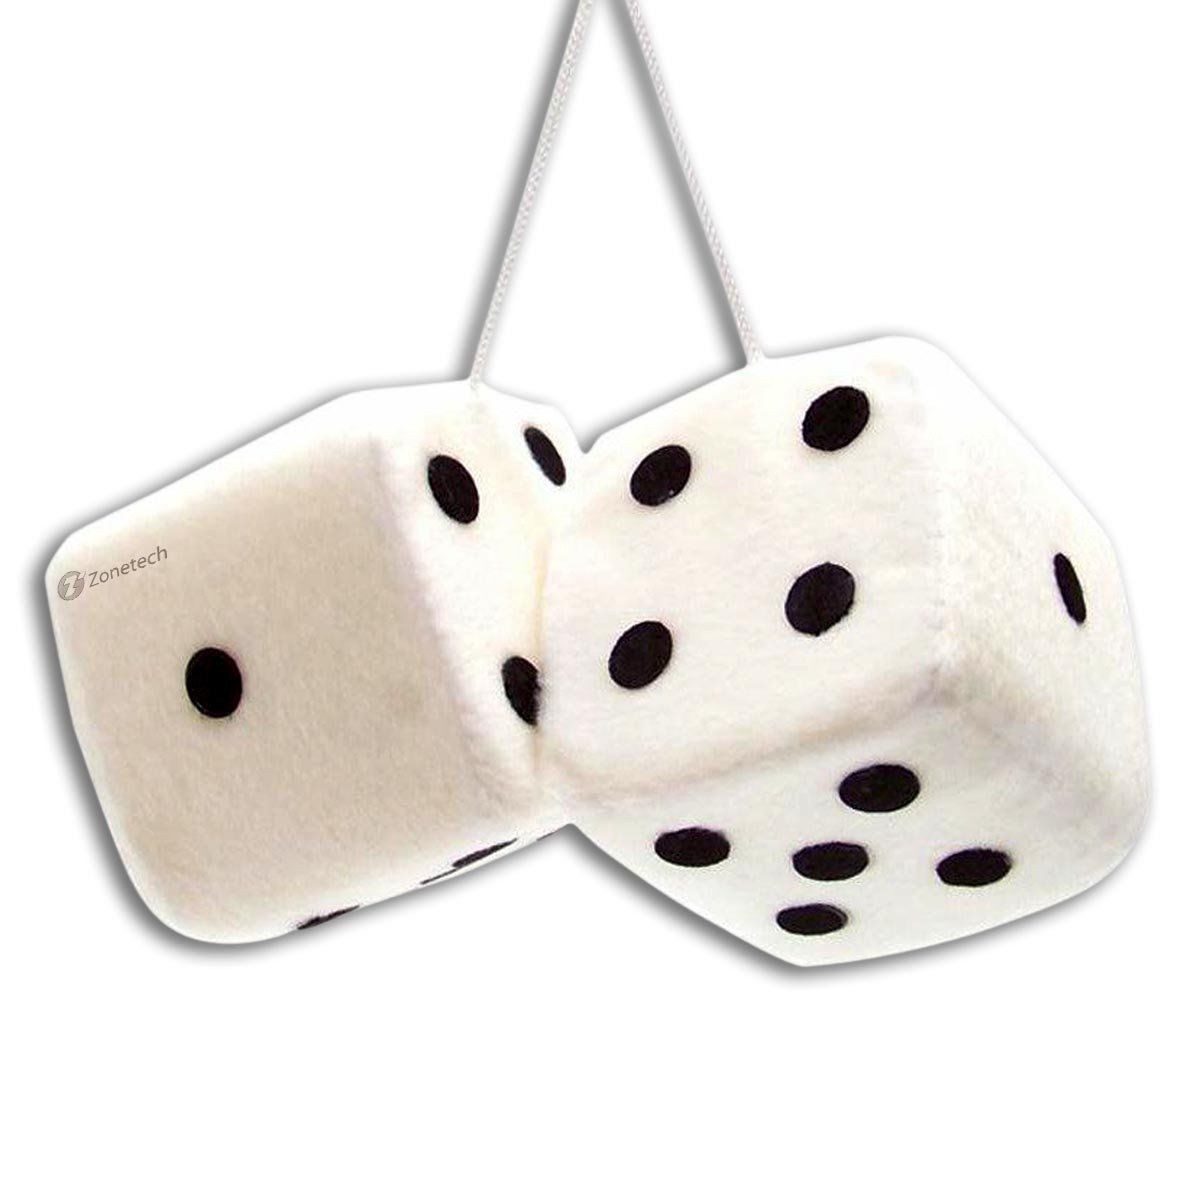 Zone Tech Blue Teal 3 Square Hanging Dice-Soft Fuzzy Decorative Vehicle Hanging Mirror Dice with White Dots Pair 